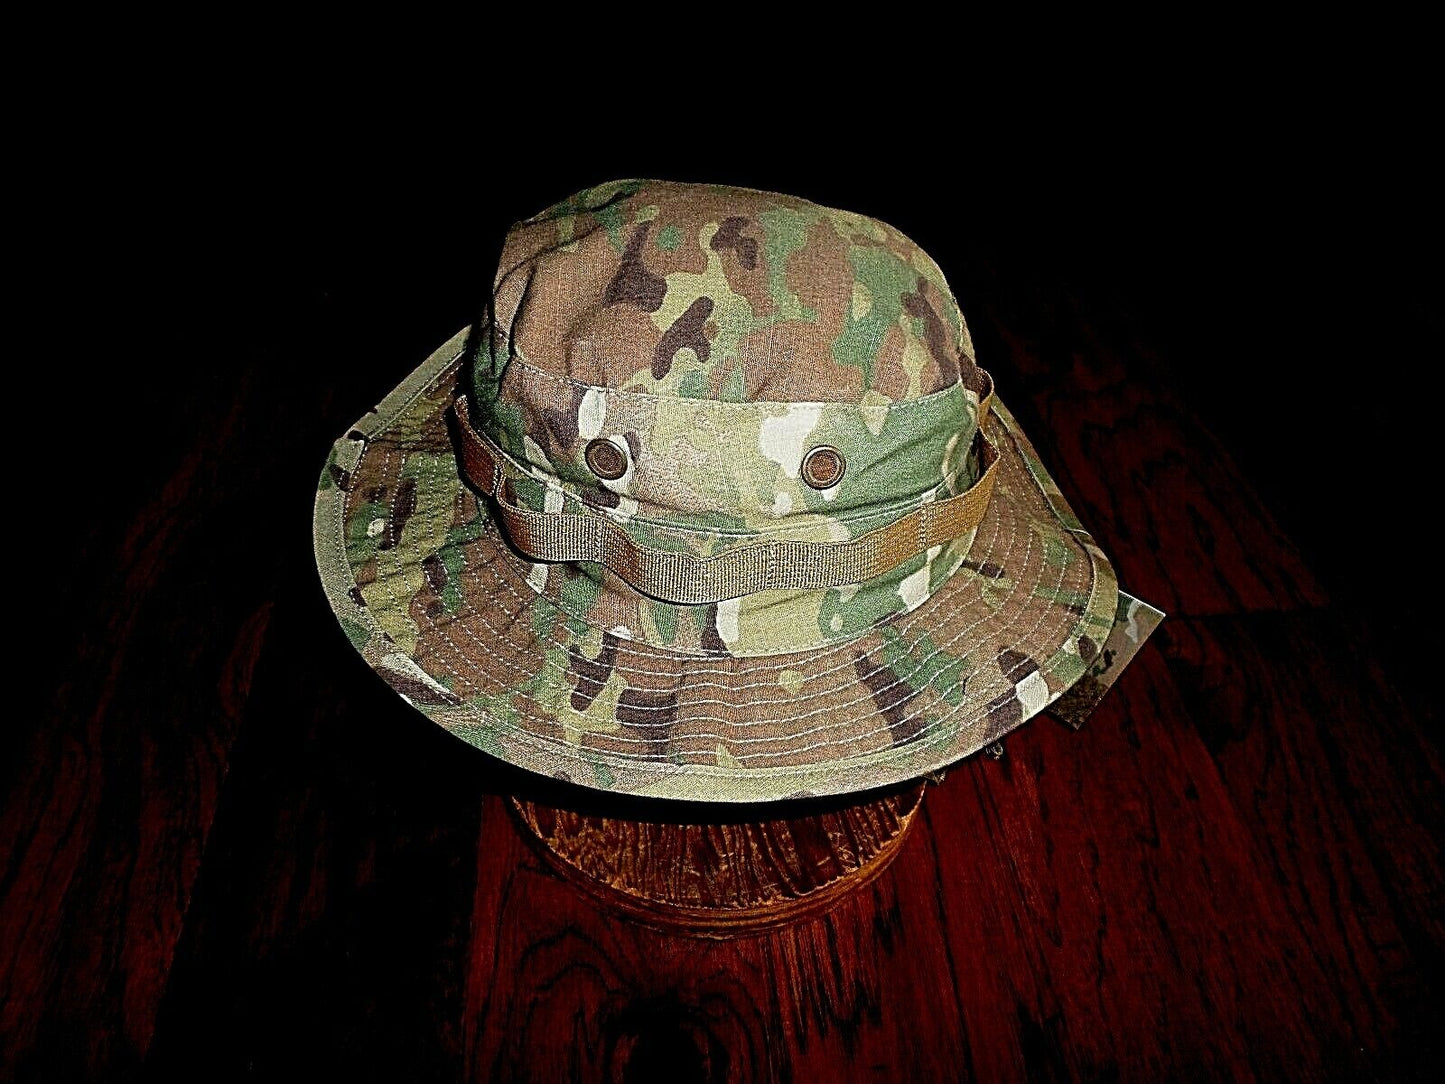 MULTICAM ARMY CAMOUFLAGE BOONIE HAT RIP STOP TYPE II HOT WEATHER HAT MEDIUM